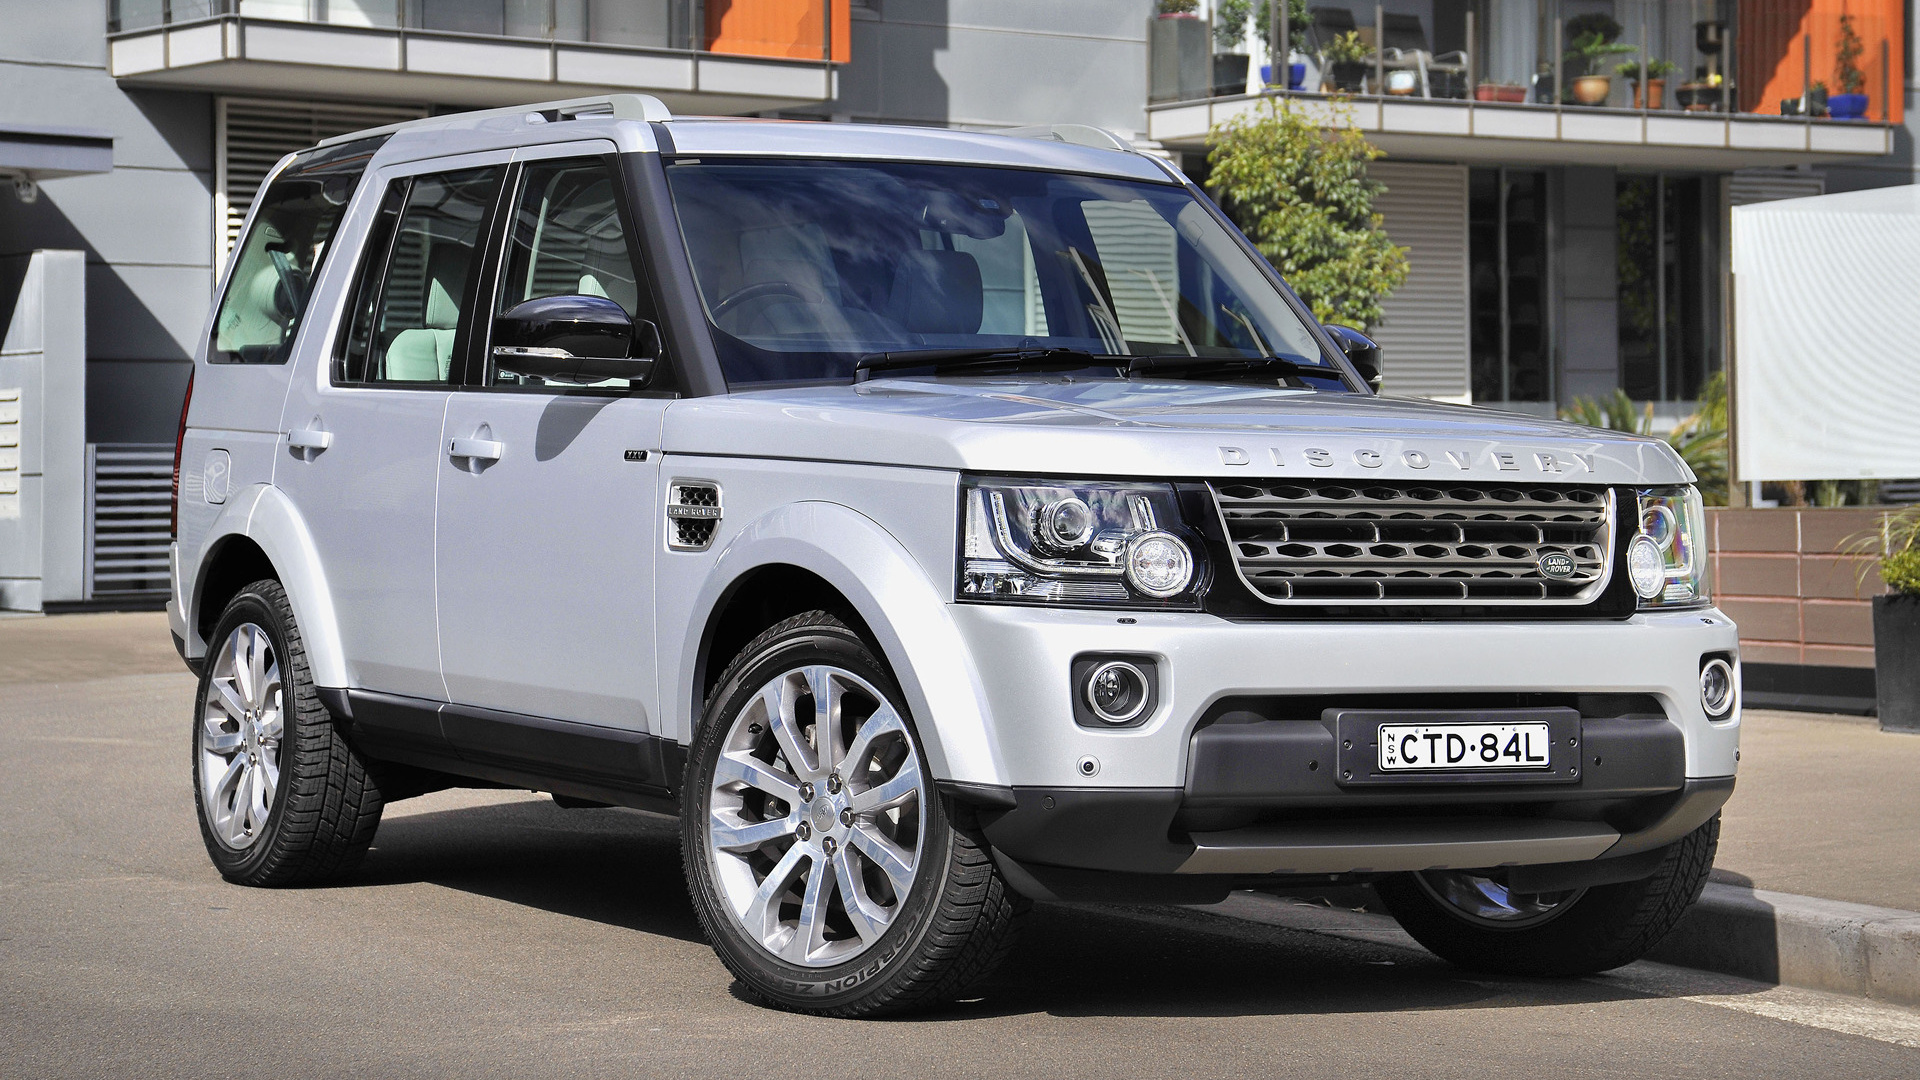 2014 Land Rover Discovery XXV Special Edition (AU) - Wallpapers and HD ...
 2014 Land Rover Discovery Wallpaper